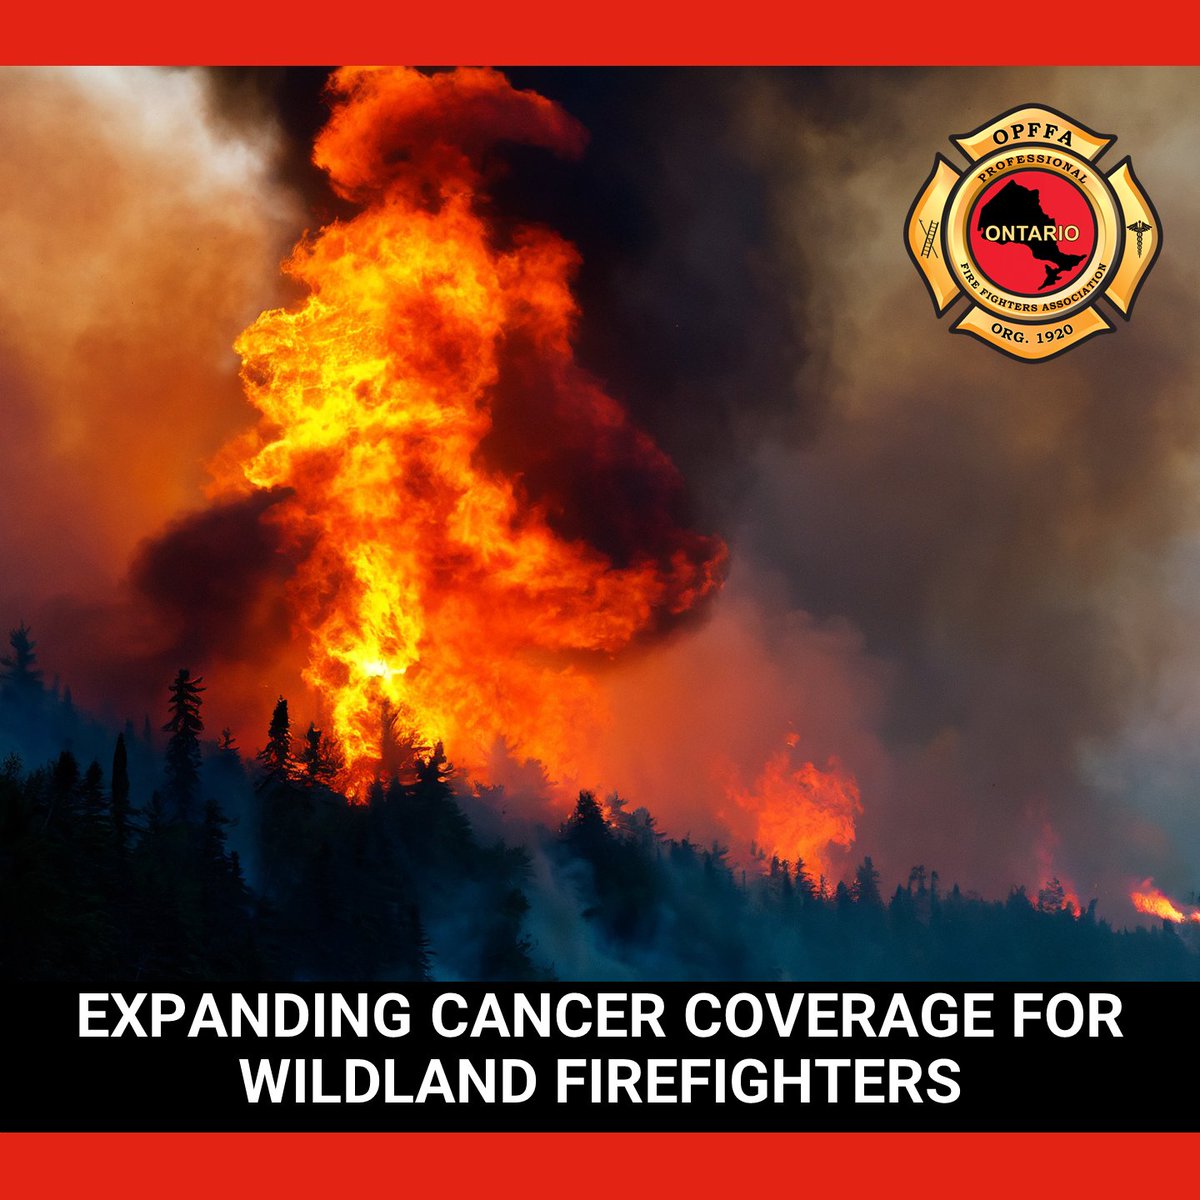 The #OPFFA applauds this #ONGov @fordnation @DavidPiccini @MPPKerzner for amending the presumptive legislation to include wildland firefighters. #Firefighters including wildland firefighters, face a higher risk of skin cancer due to sun exposure & potential carcinogen exposure.